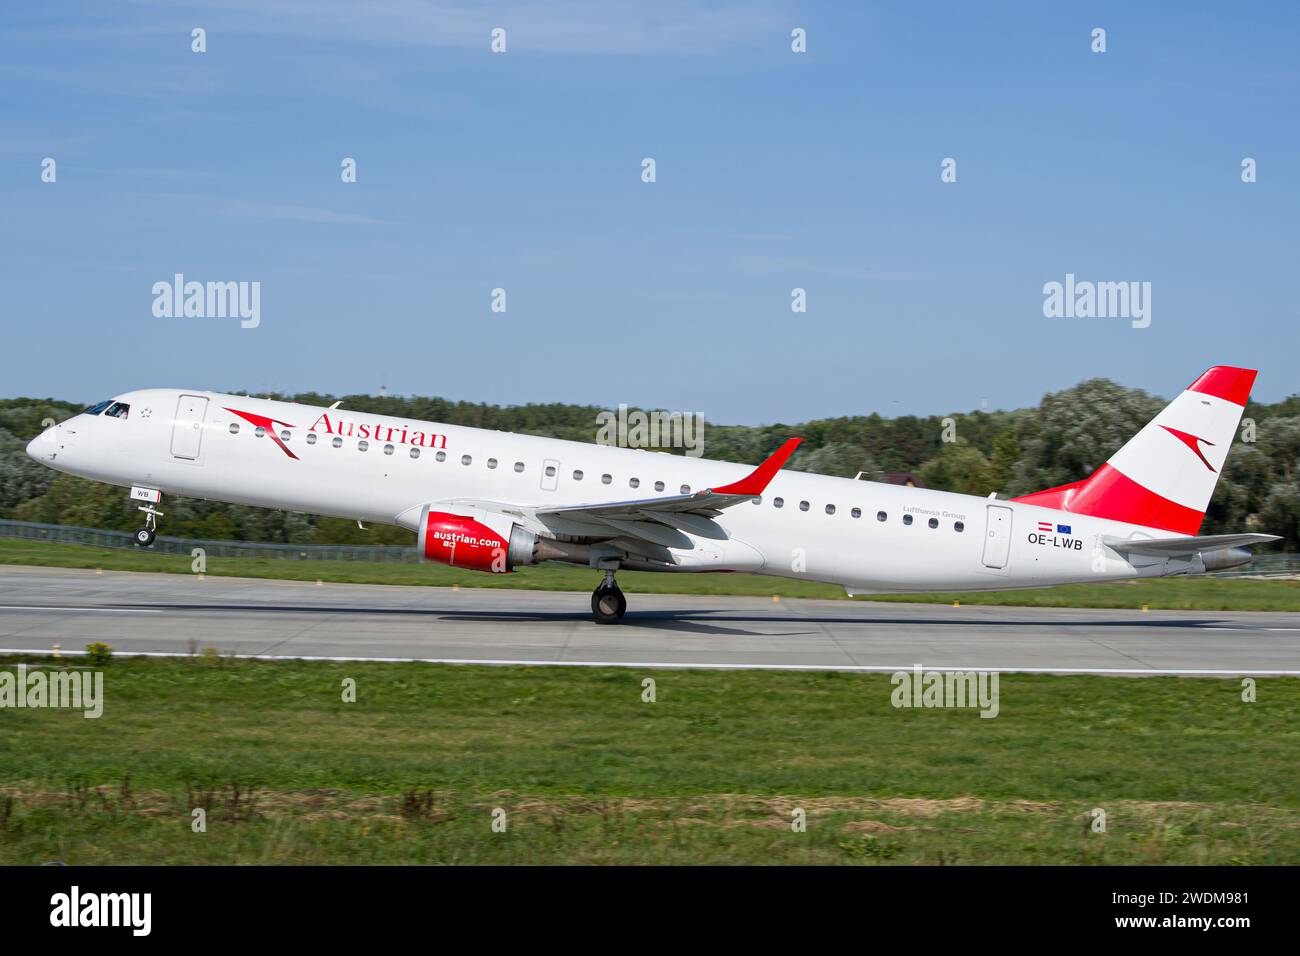 Austrian Airlines Embraer E195 aircraft taking off from Lviv Airport Stock Photo